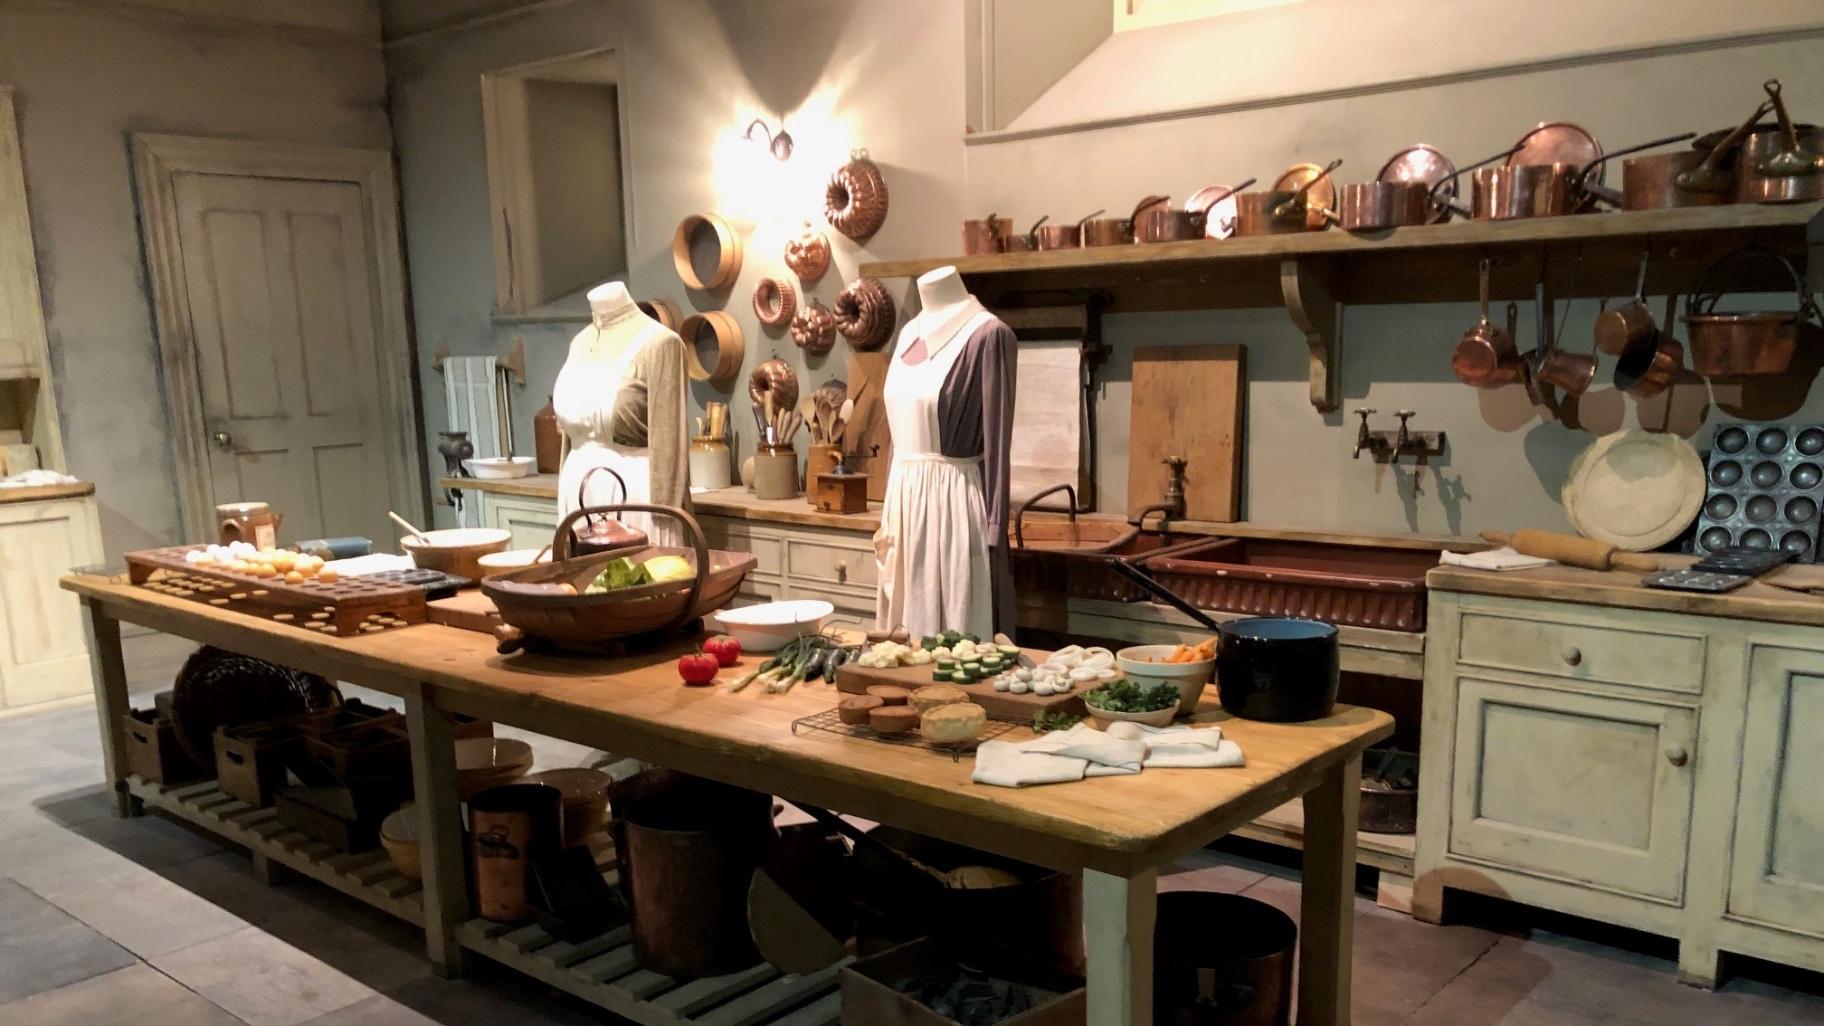 Mrs. Patmore’s kitchen is featured at Downton Abbey: The Exhibition.” (Marc Vitali / WTTW News)